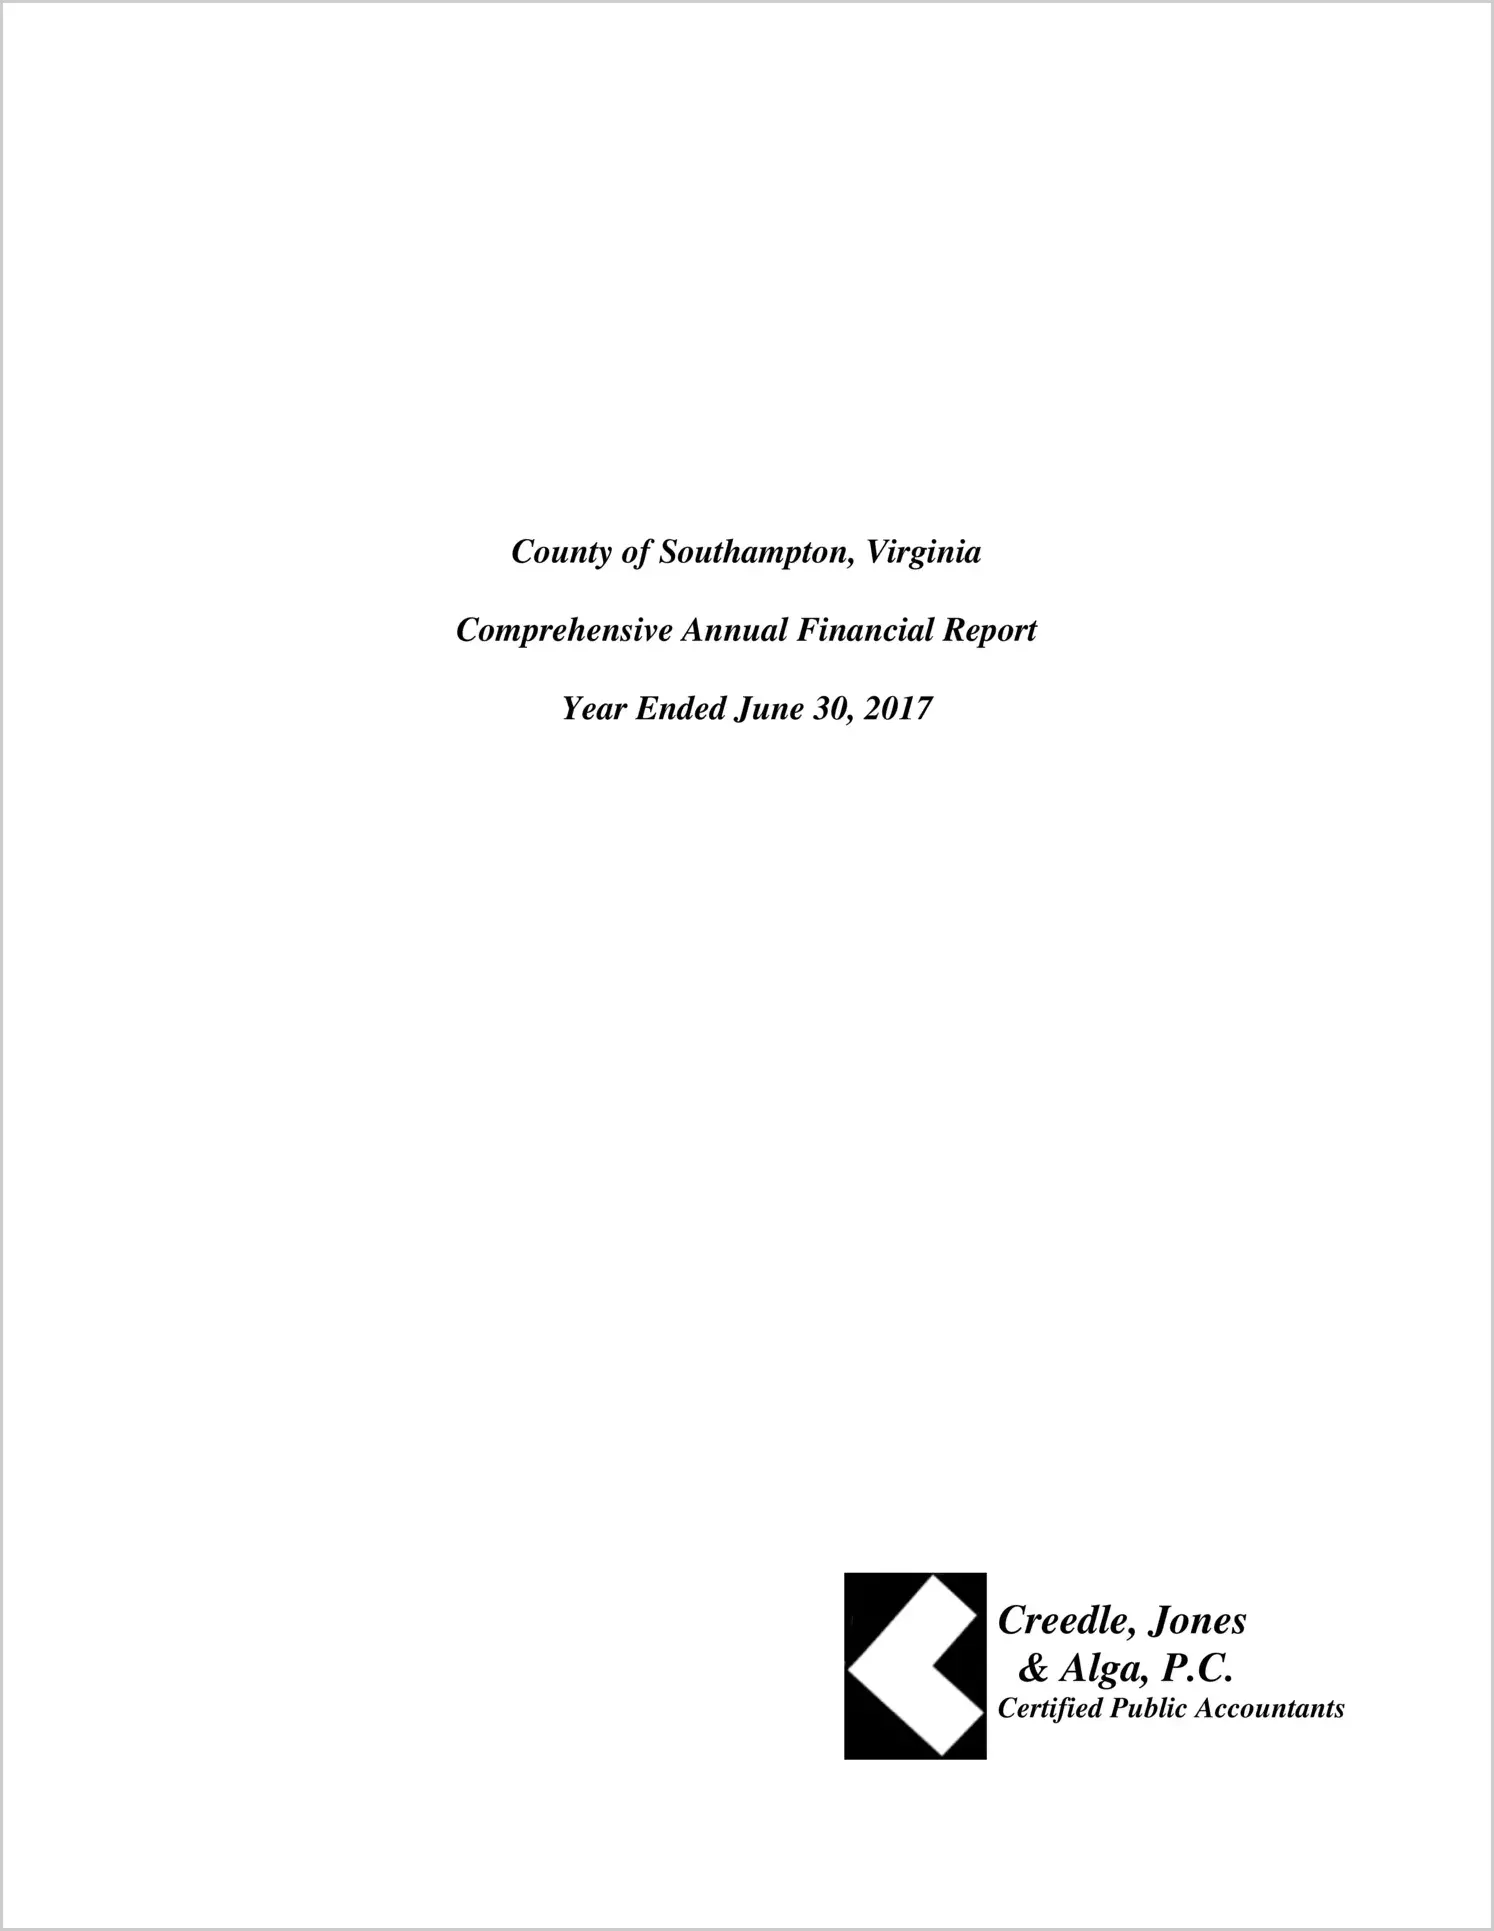 2017 Annual Financial Report for County of Southampton